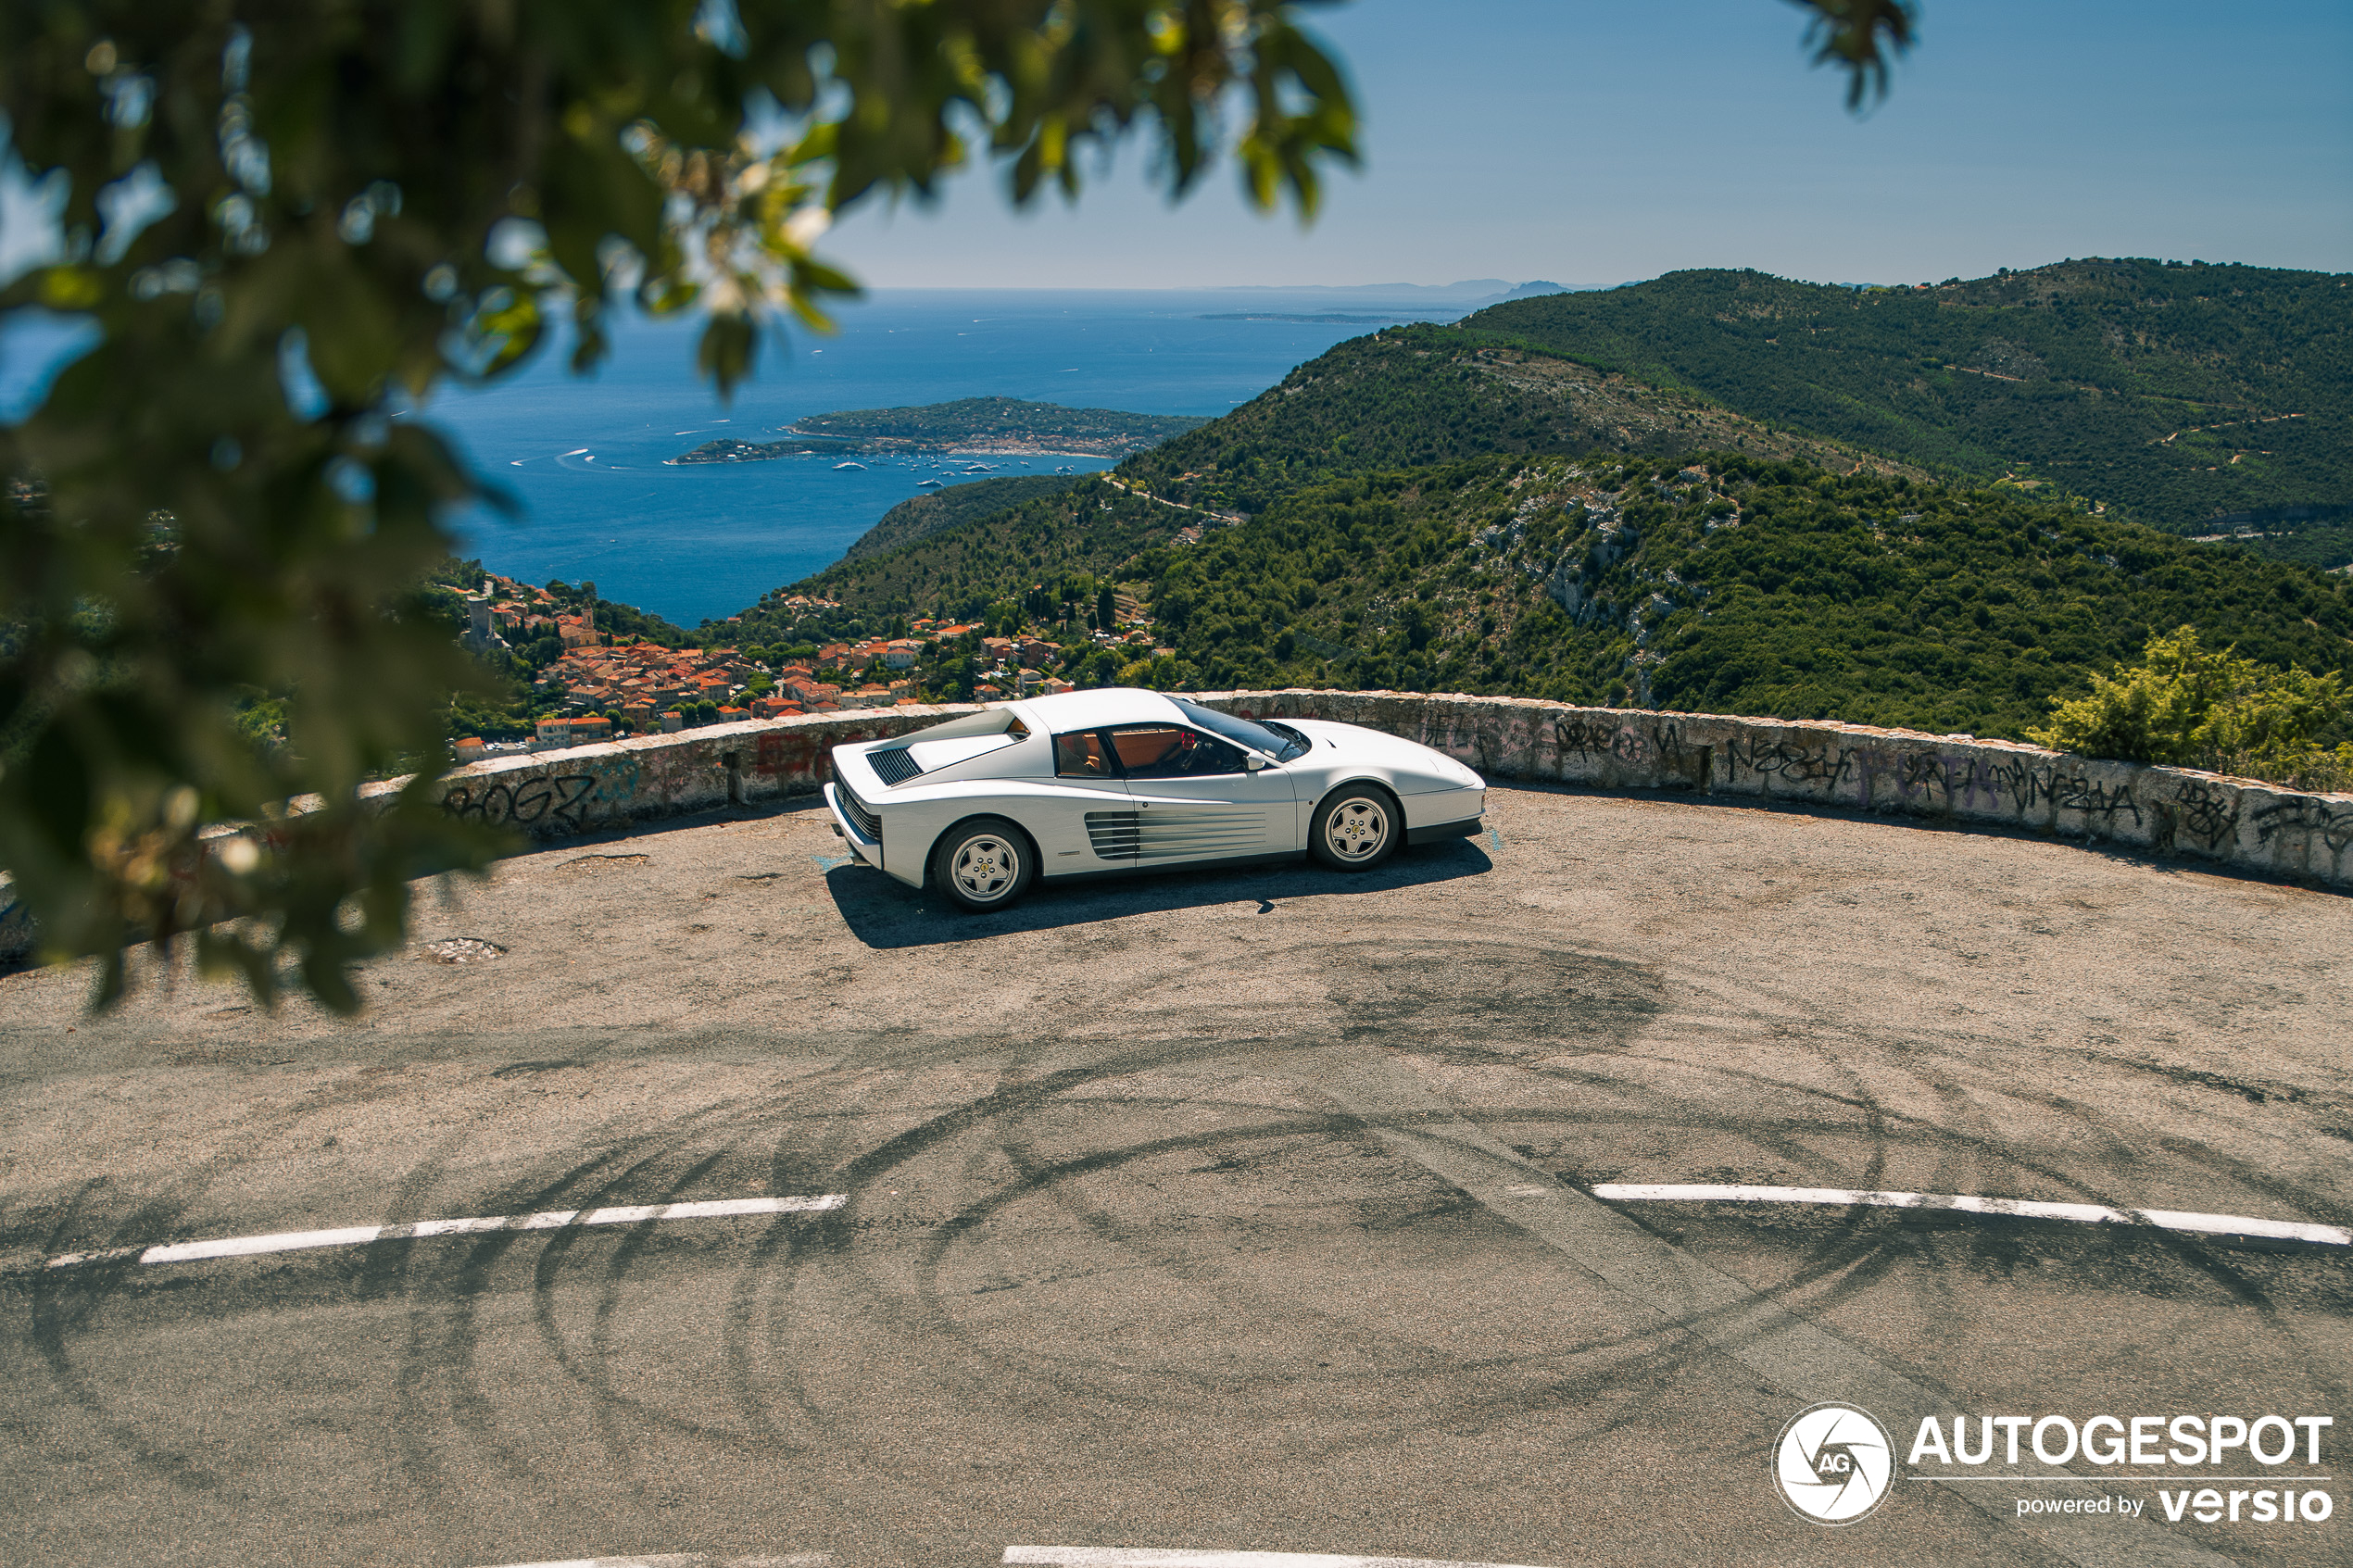 A white Testarossa captured in the mountains of southern France